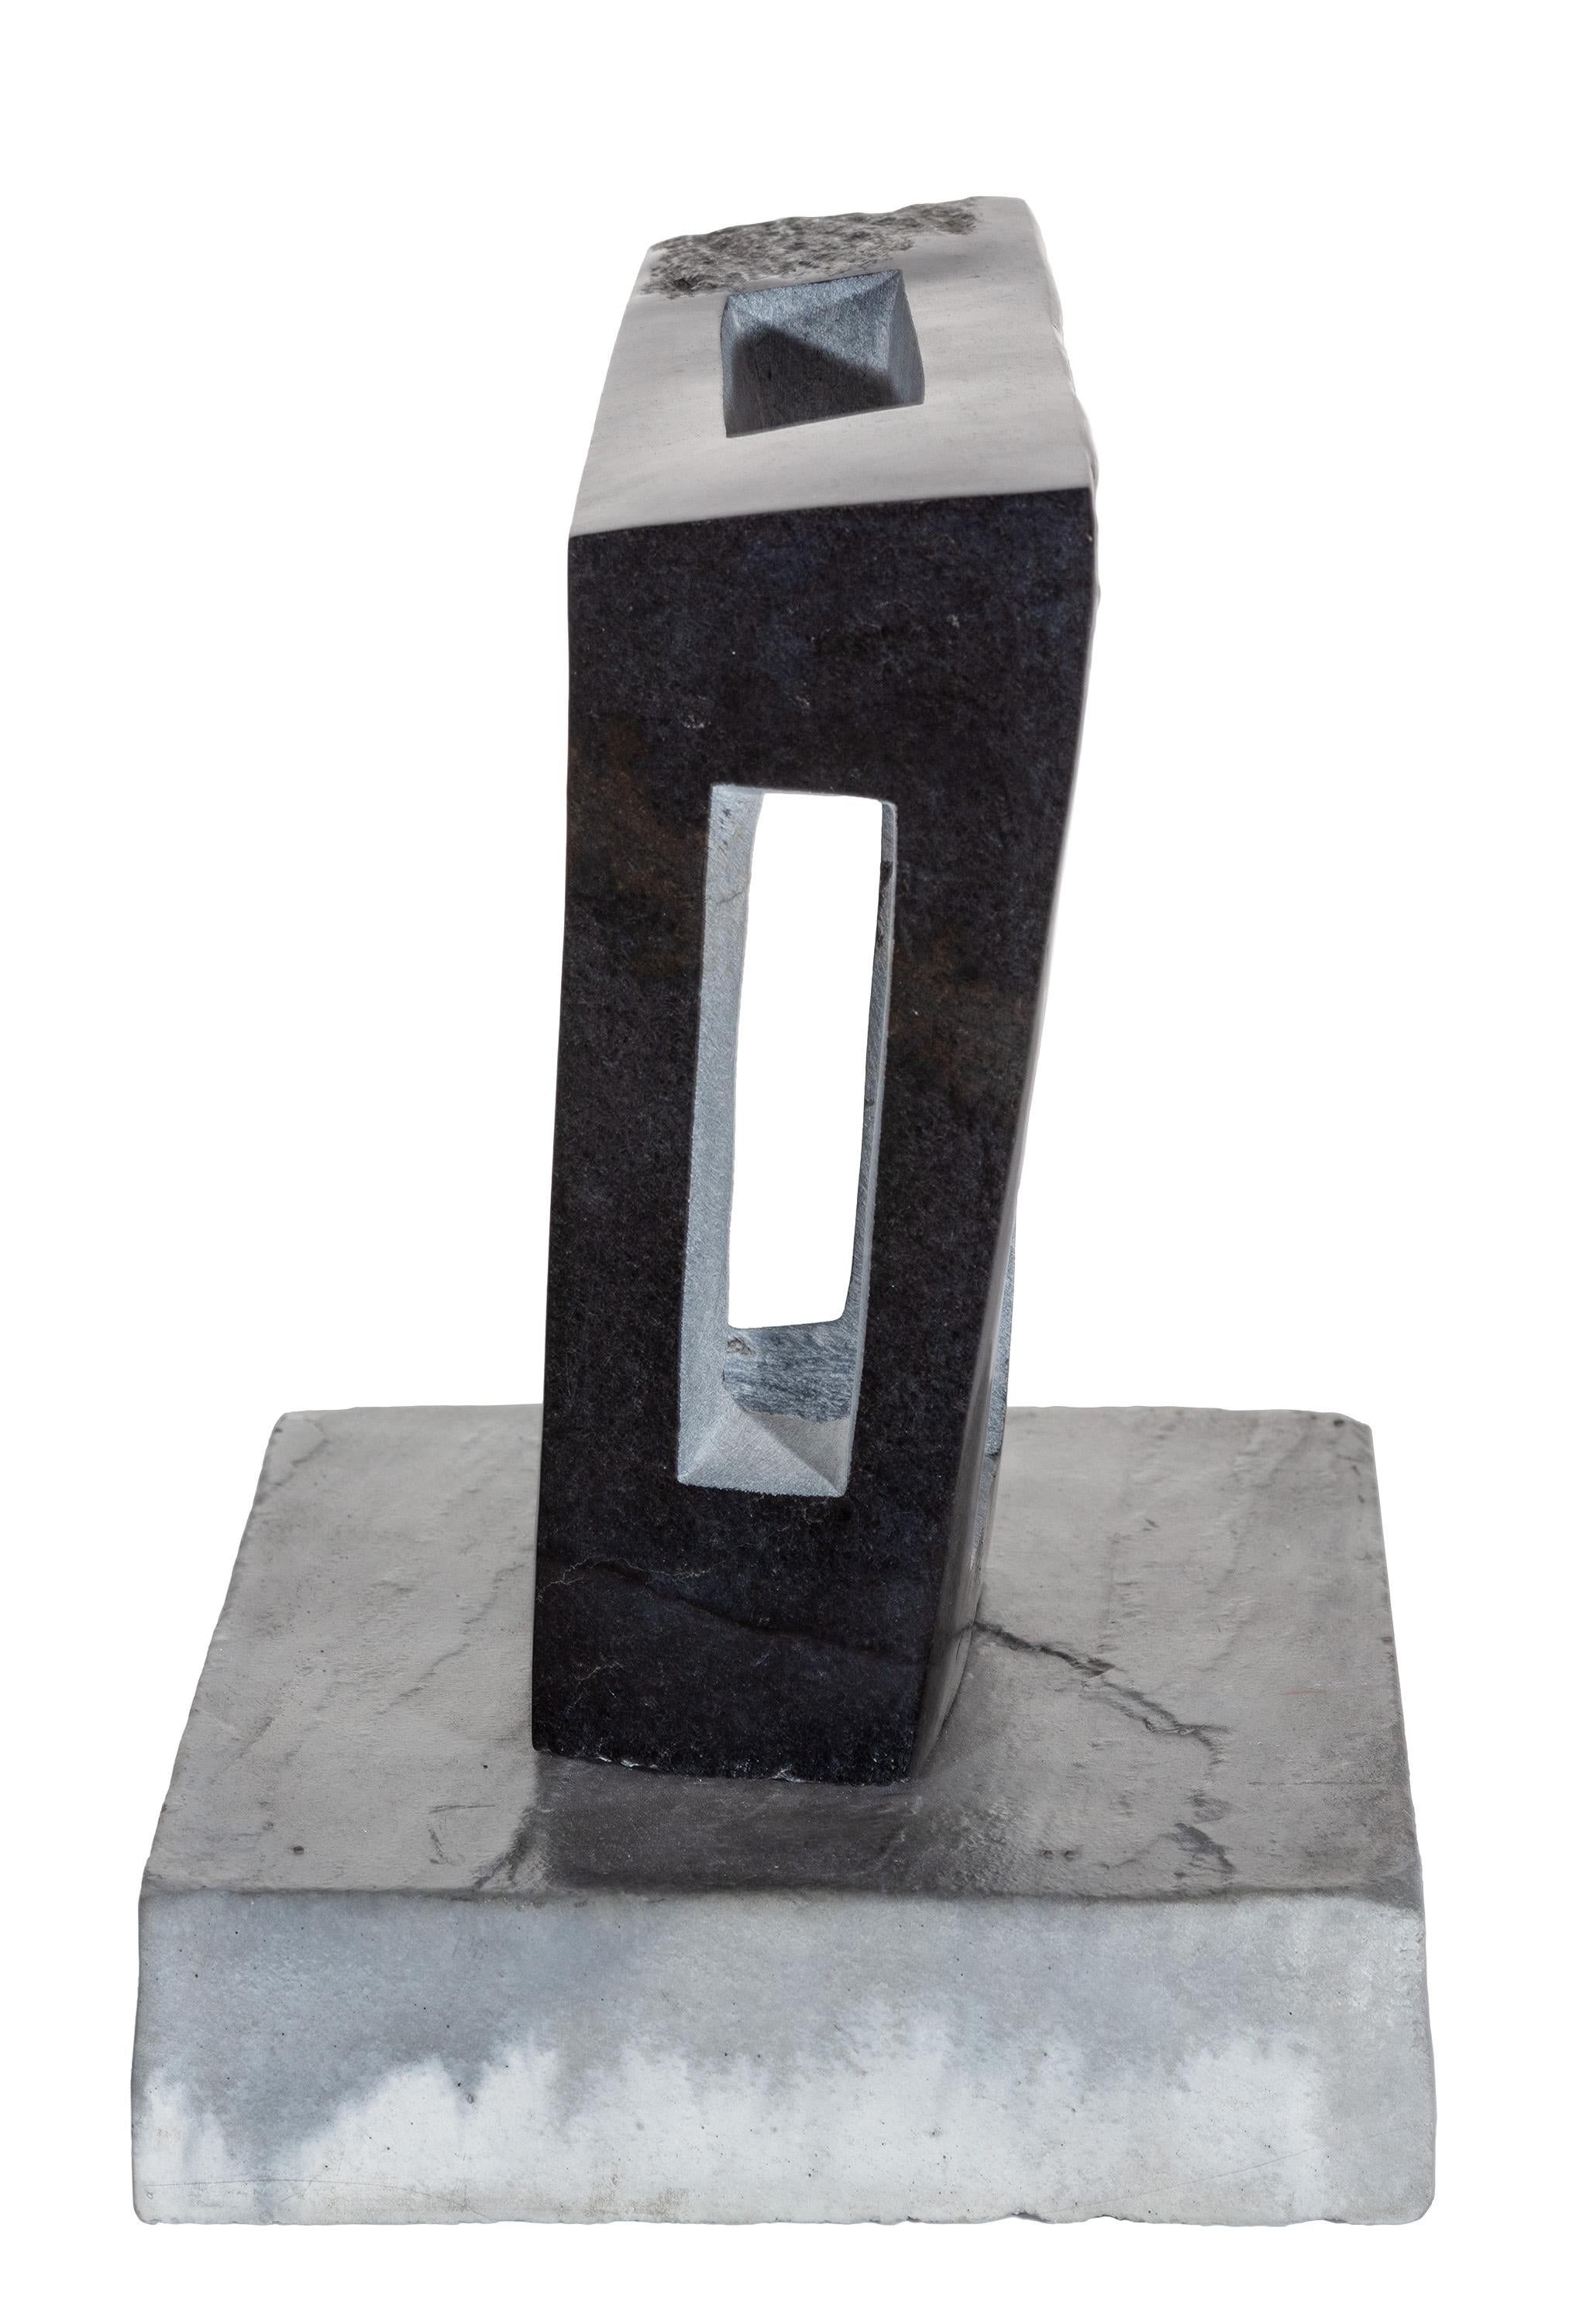 Abstract Stone Modern Black Sculpture Minimal Contemporary Signed African Artist For Sale 1